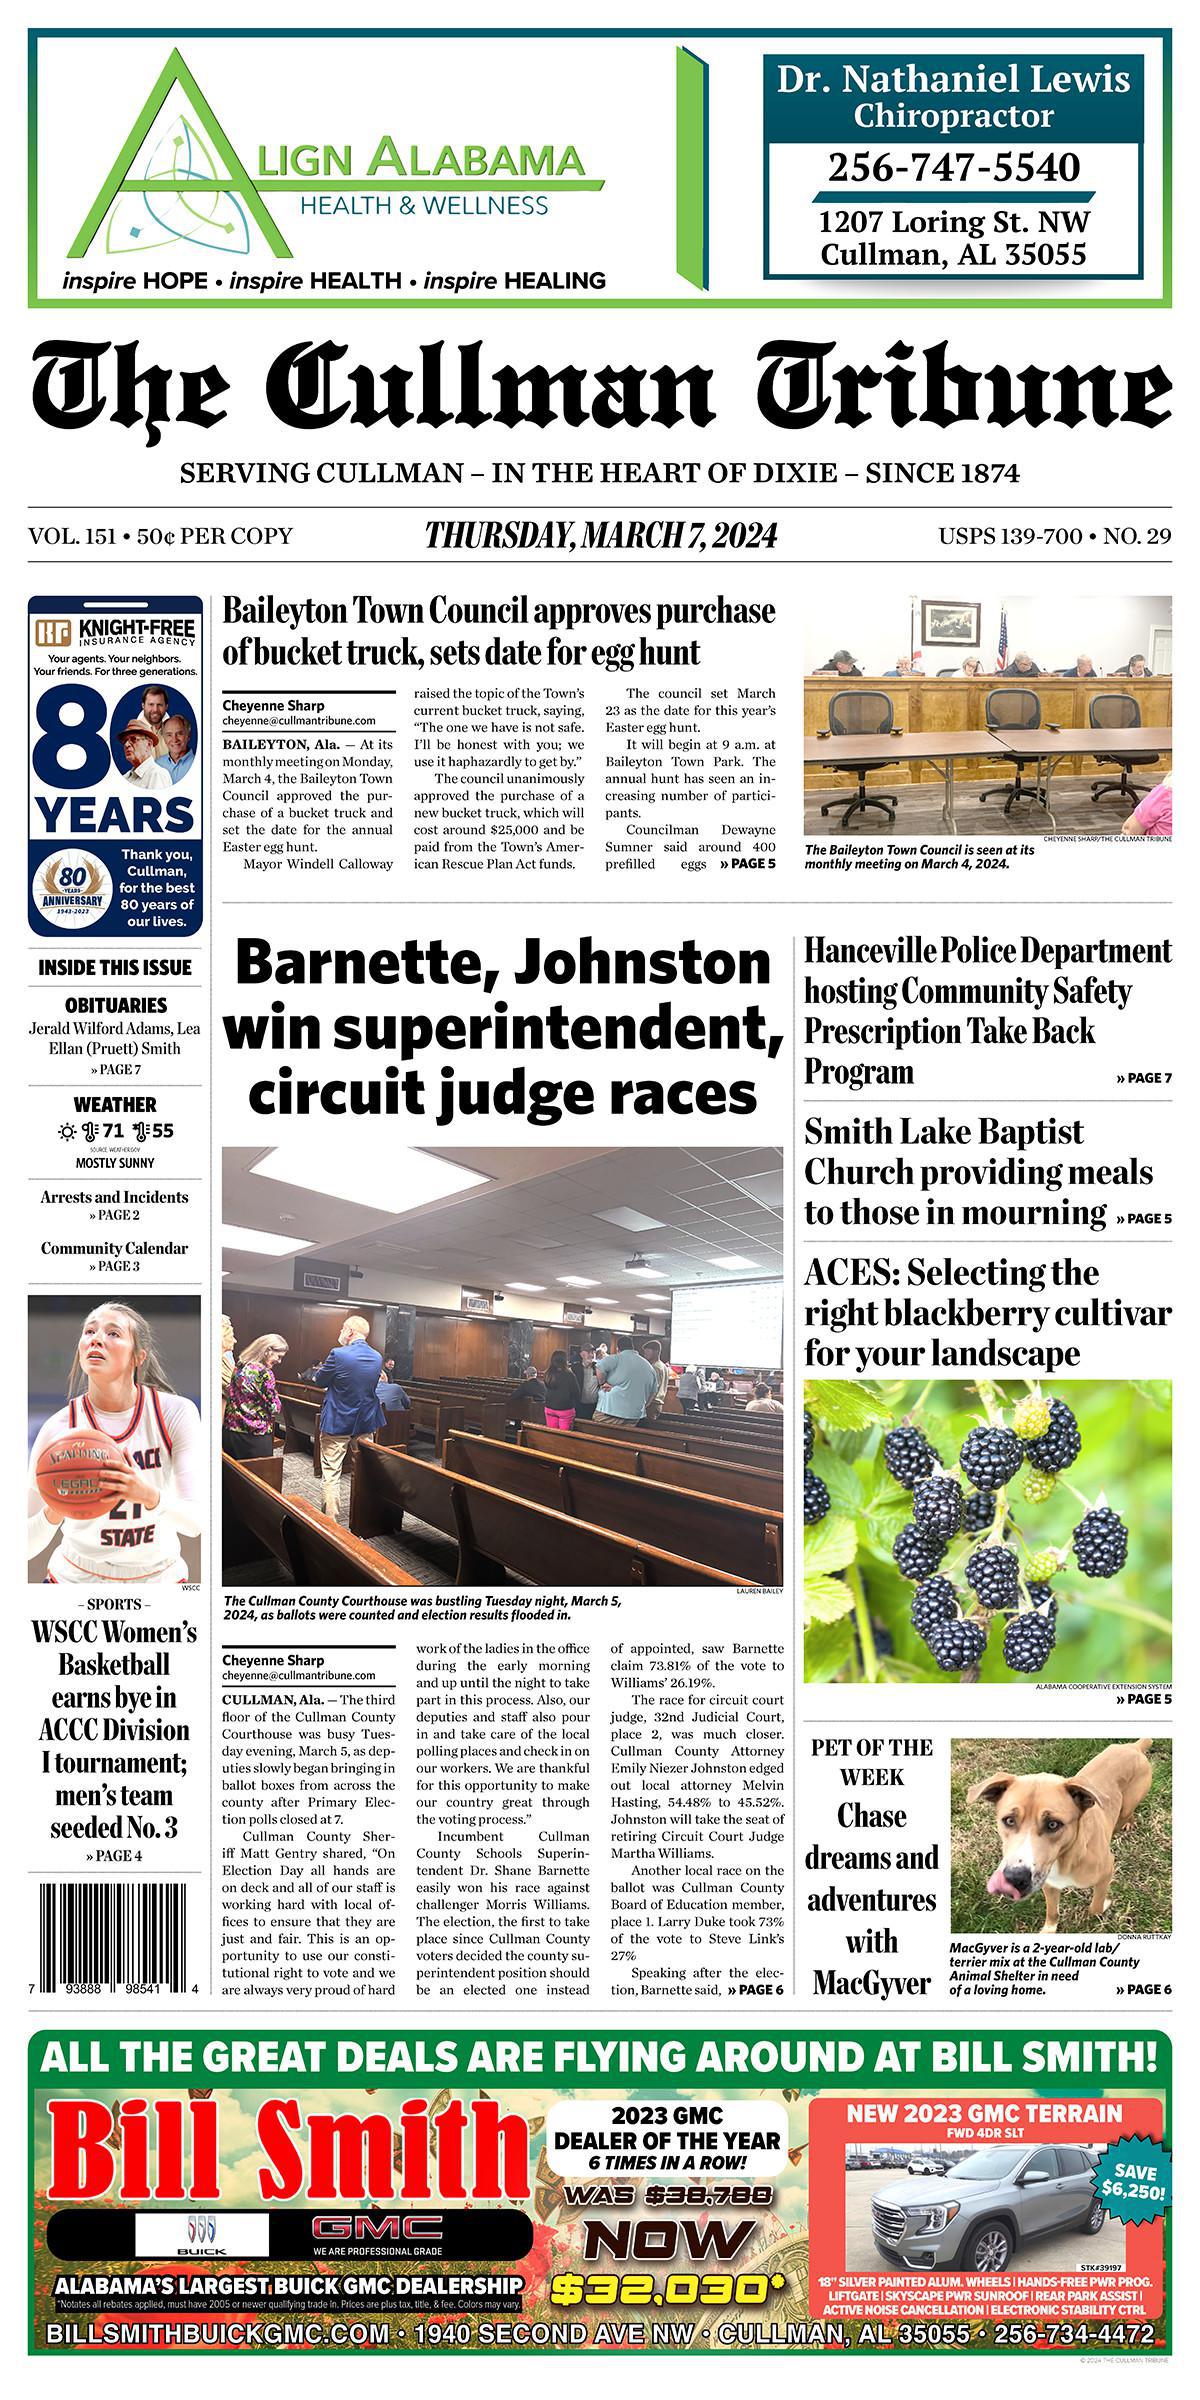 Good Morning Cullman! The 03-07-2024 edition of the Cullman Tribune is now ready to view.